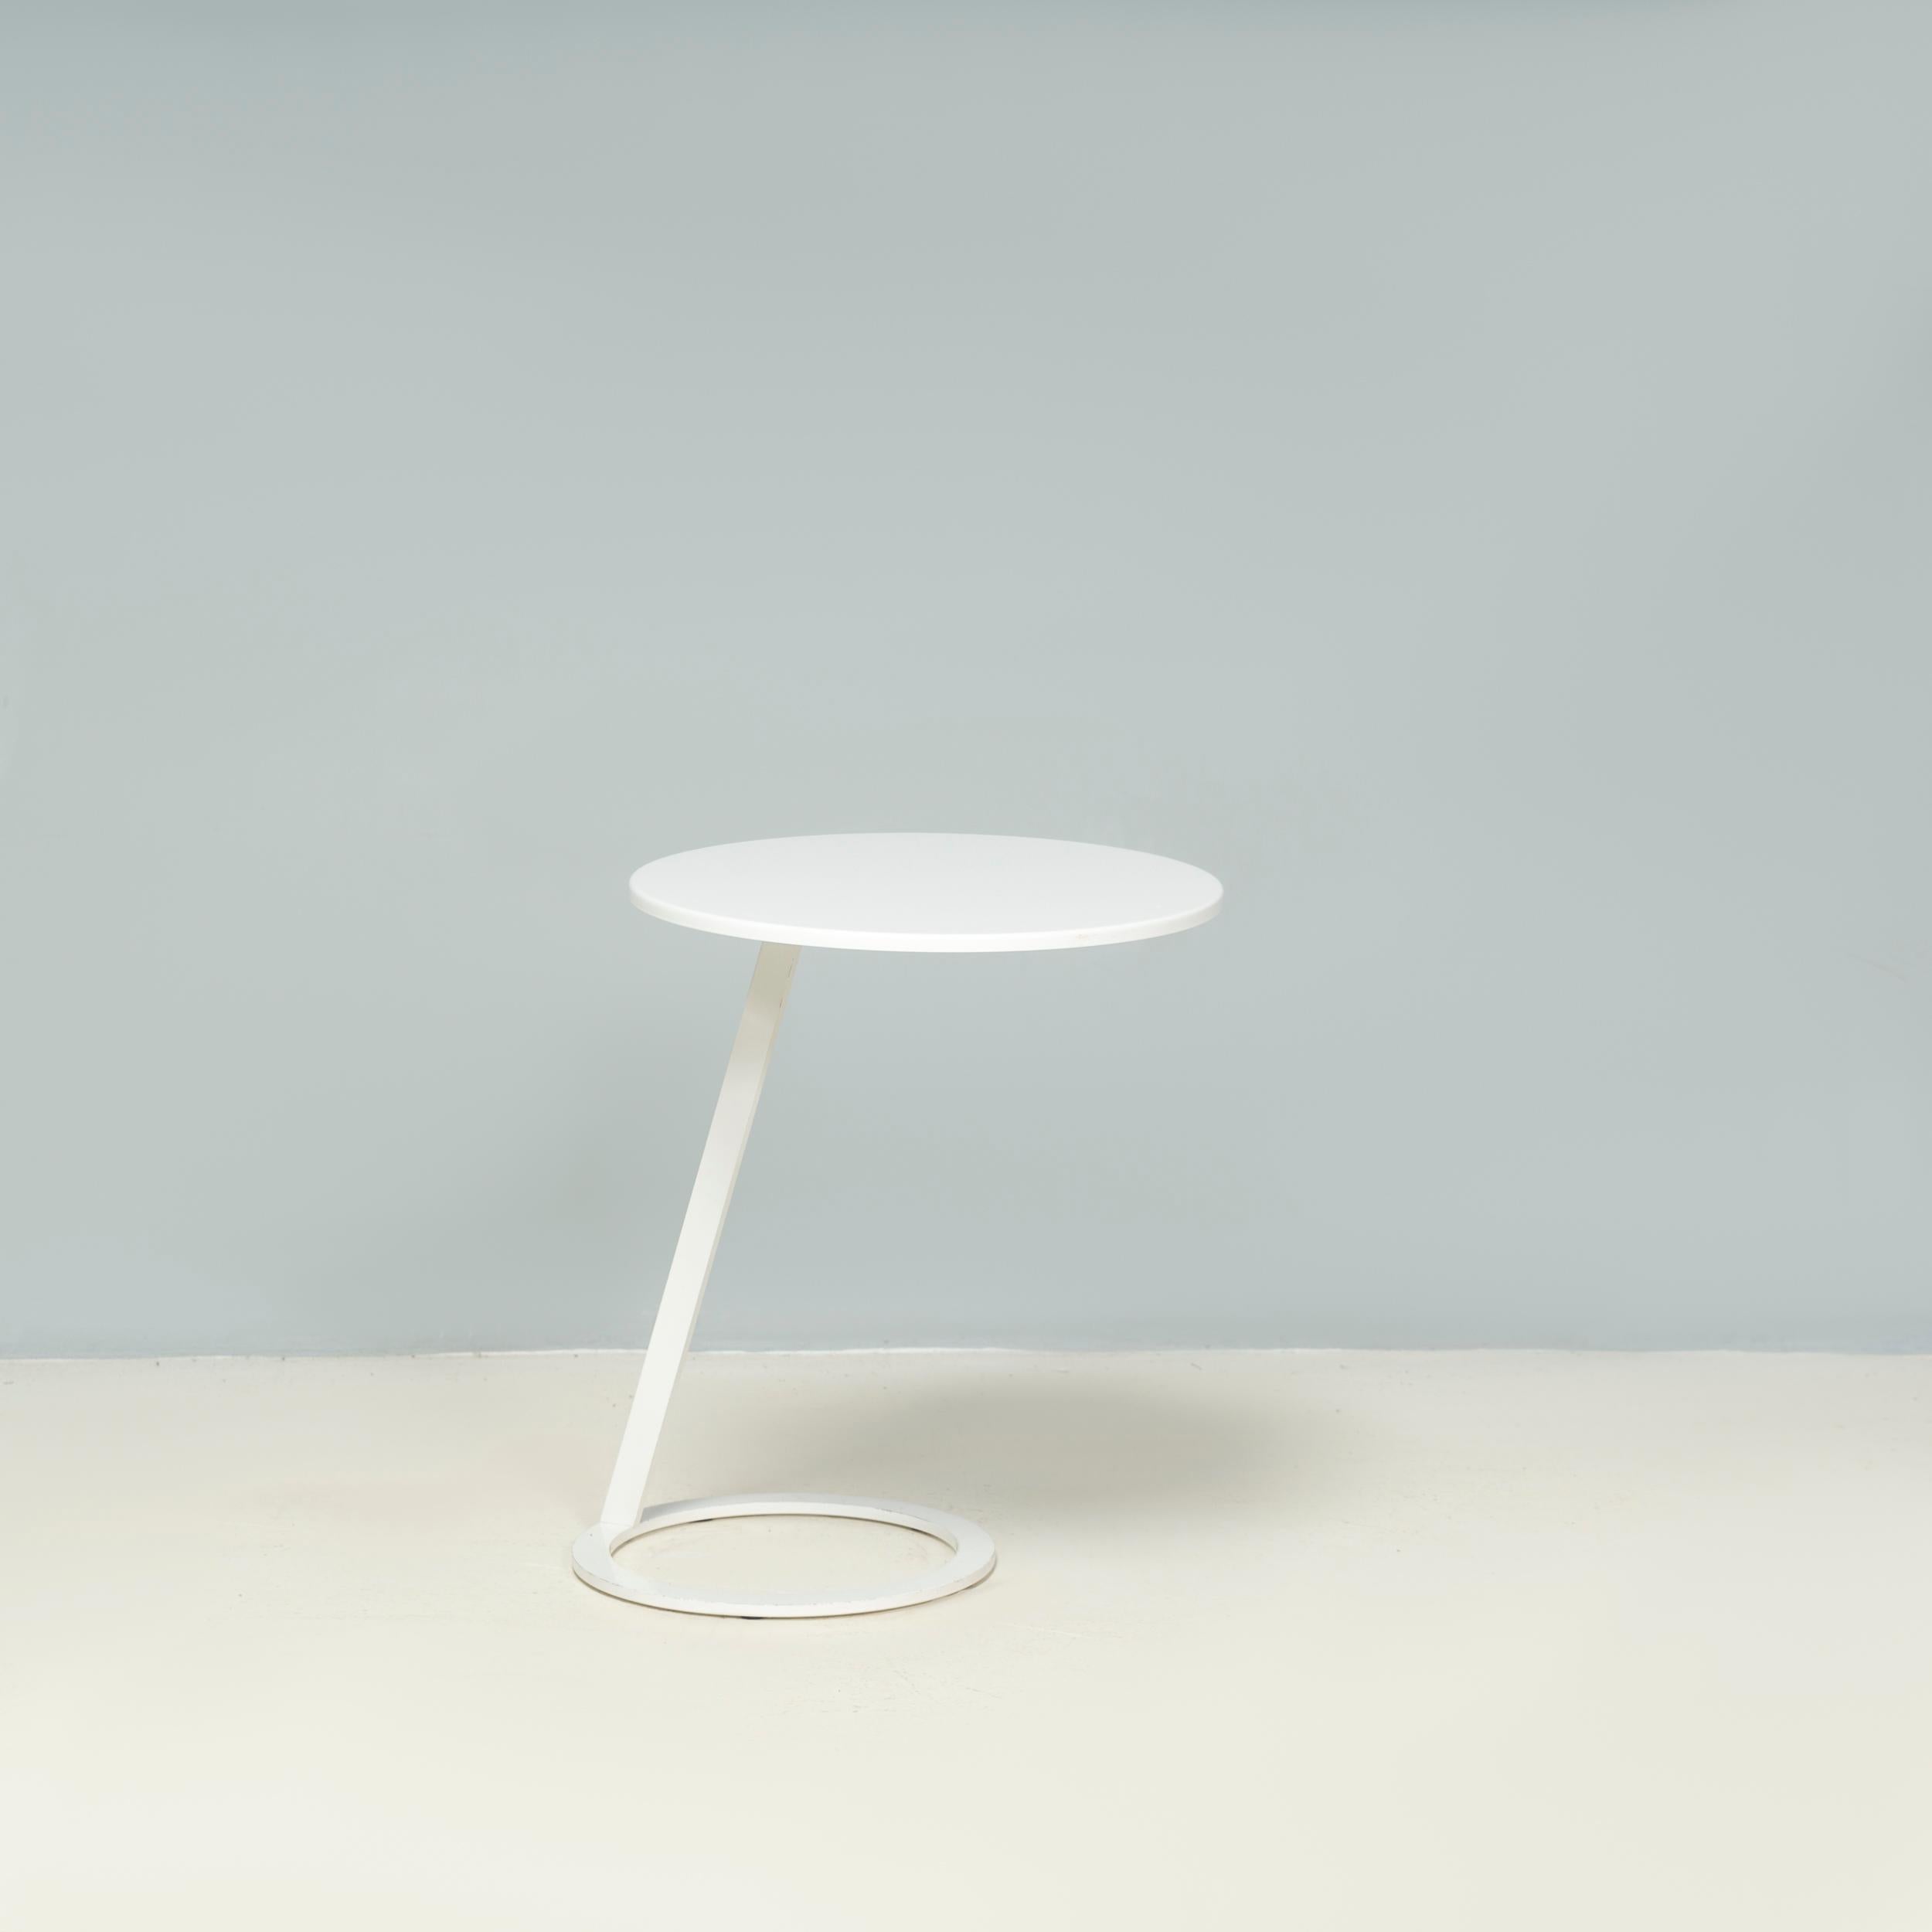 Originally designed by Alban-Sébastien Gilles for Ligne Roset in 2002, the Good Morning side table is a fantastic example of minimalist contemporary design.

Constructed from metal with a white lacquer finish, the pedestal table sits on a circular